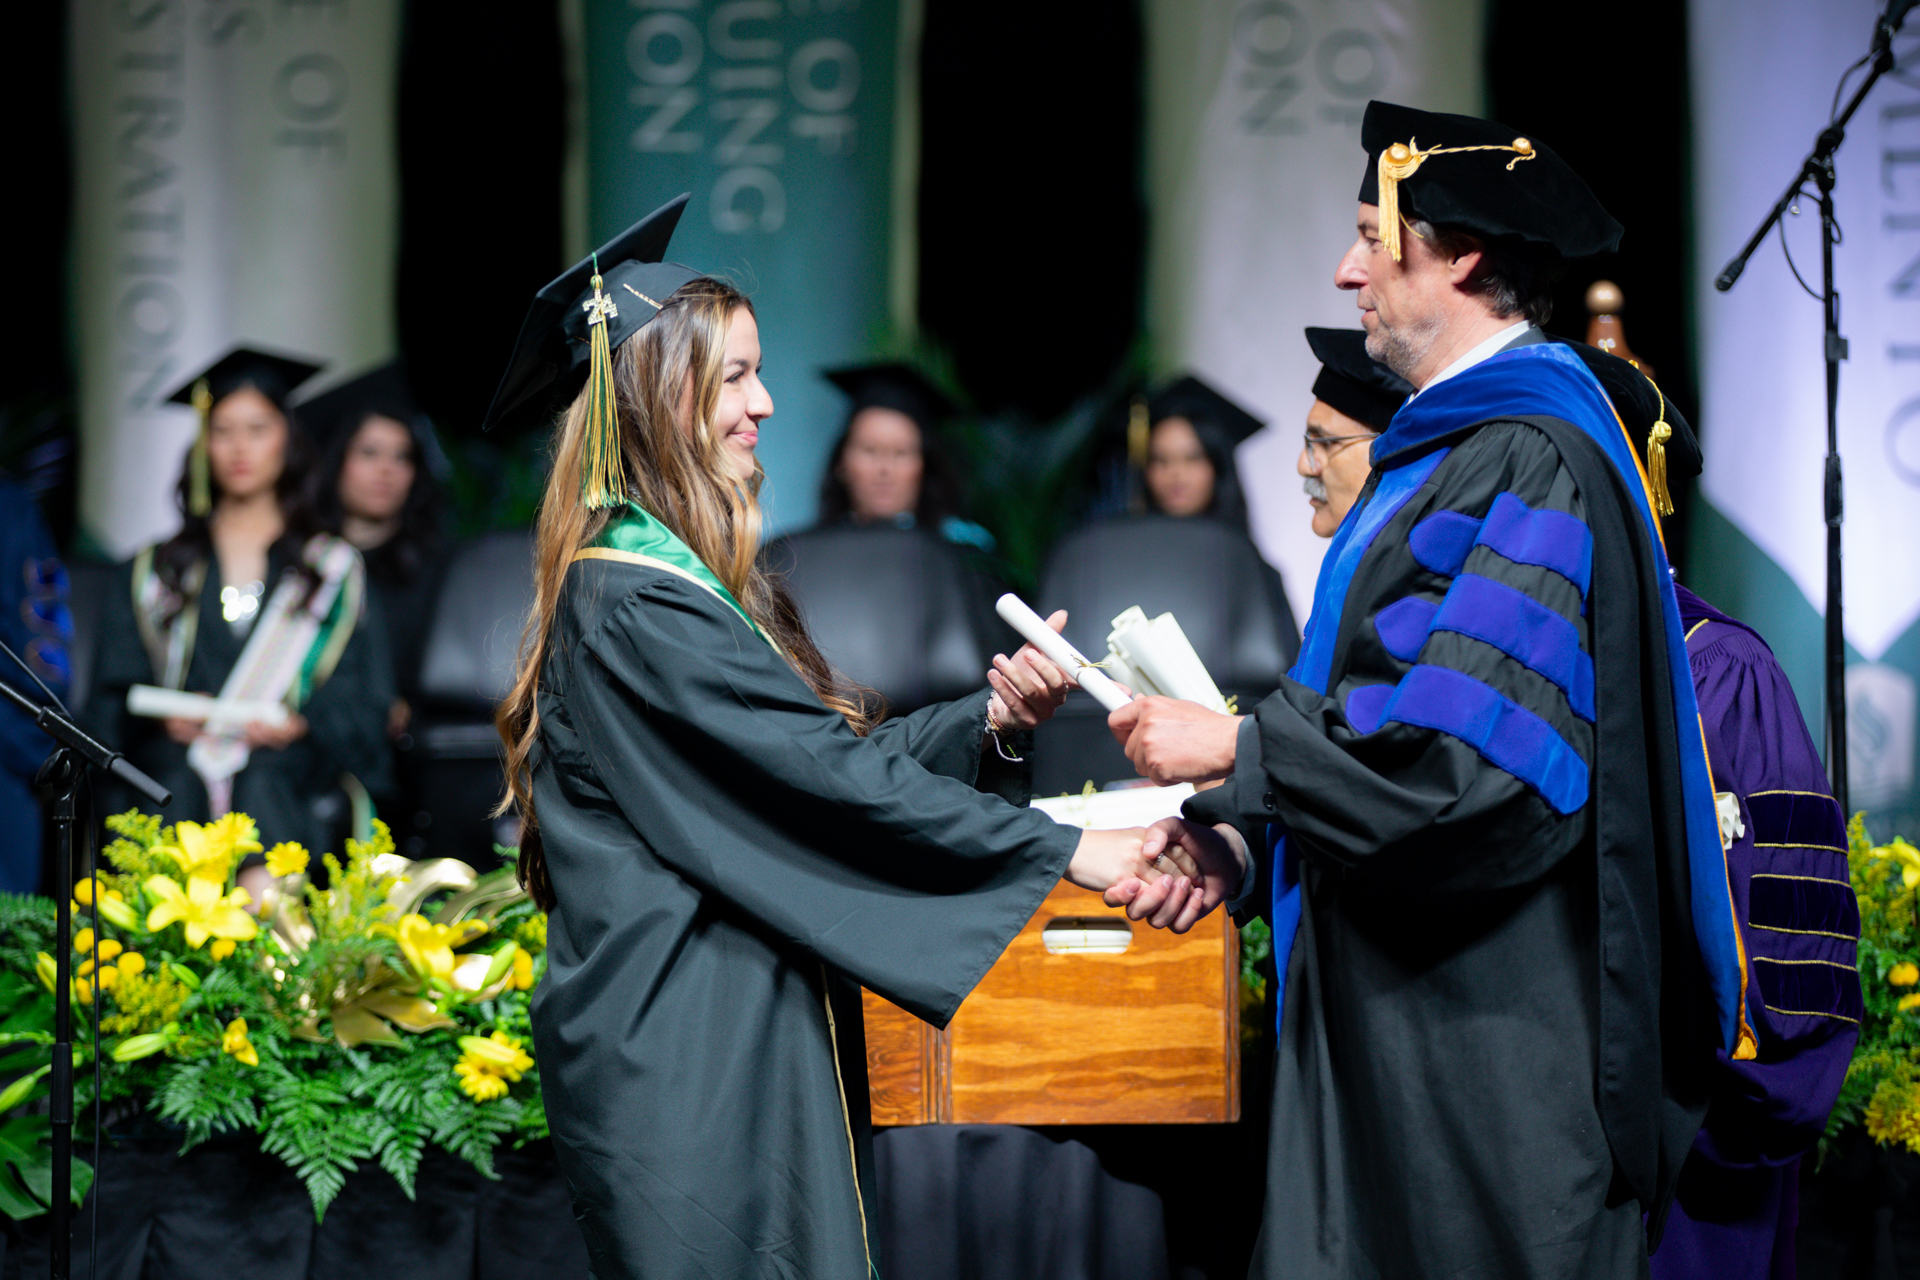 A woman dressed in academic regalia shakes the hand of a University dean while receiving a diploma during Commencement.